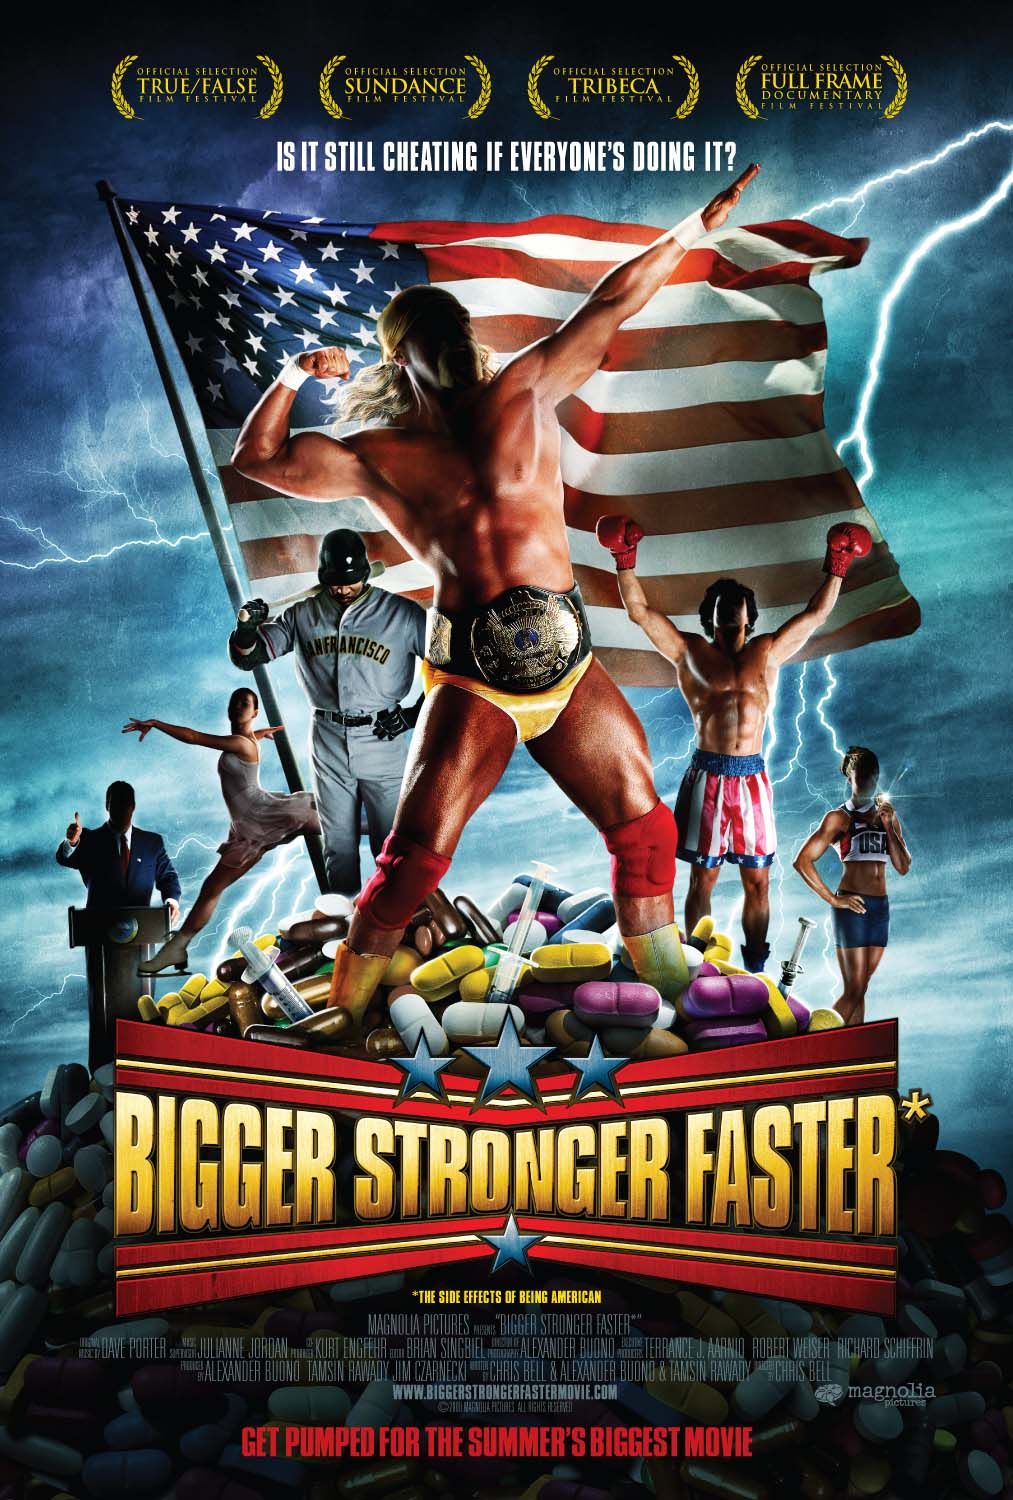 Extra Large Movie Poster Image for Bigger, Stronger, Faster* (#6 of 6)